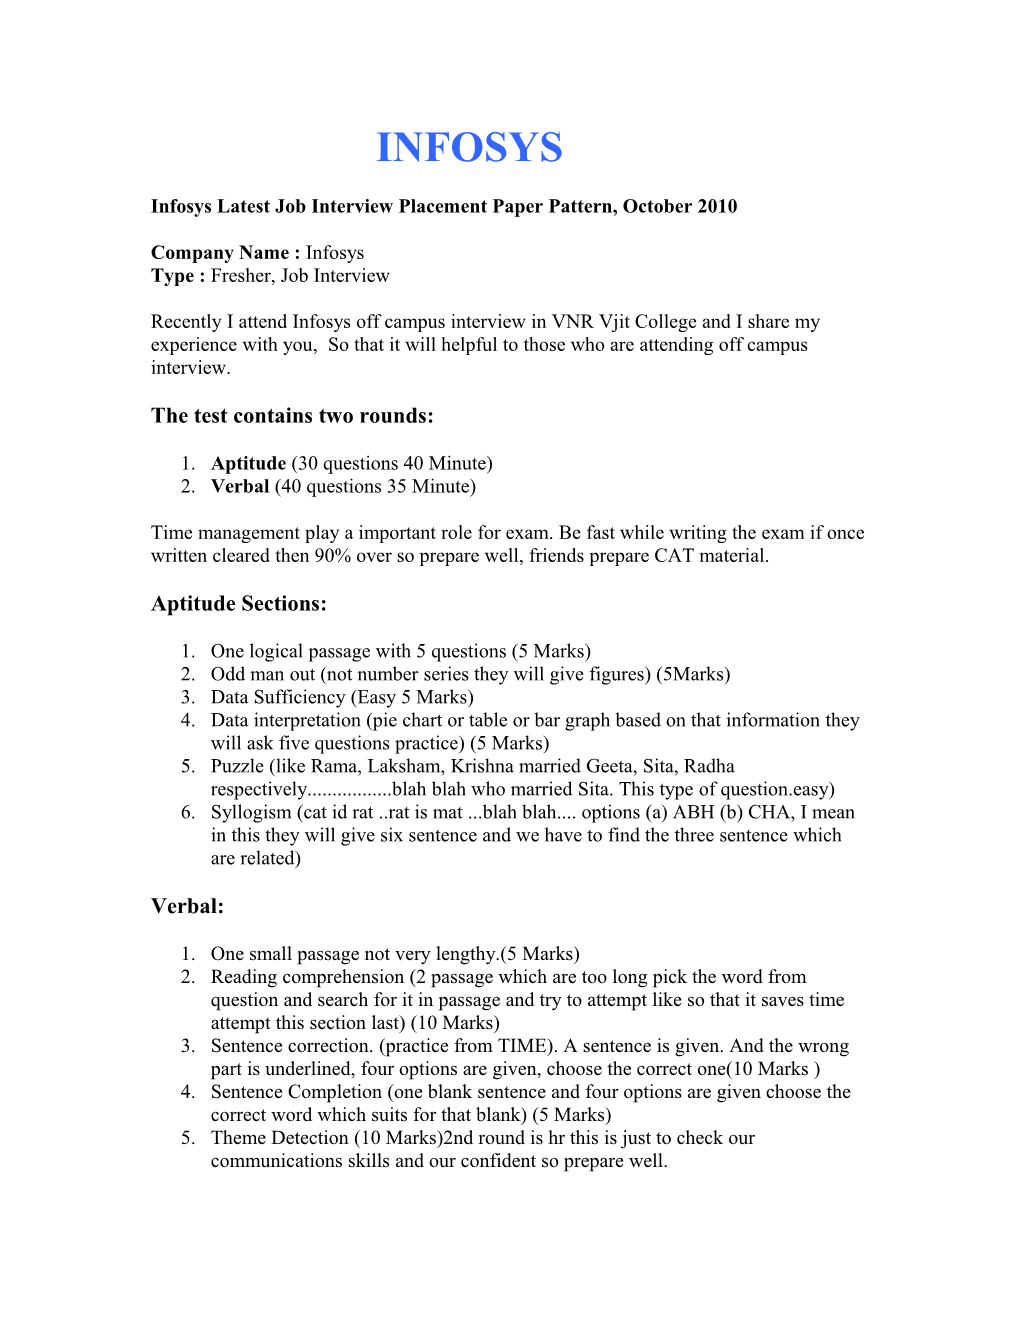 Infosys Latest Job Interview Placement Paper Pattern, October 2010